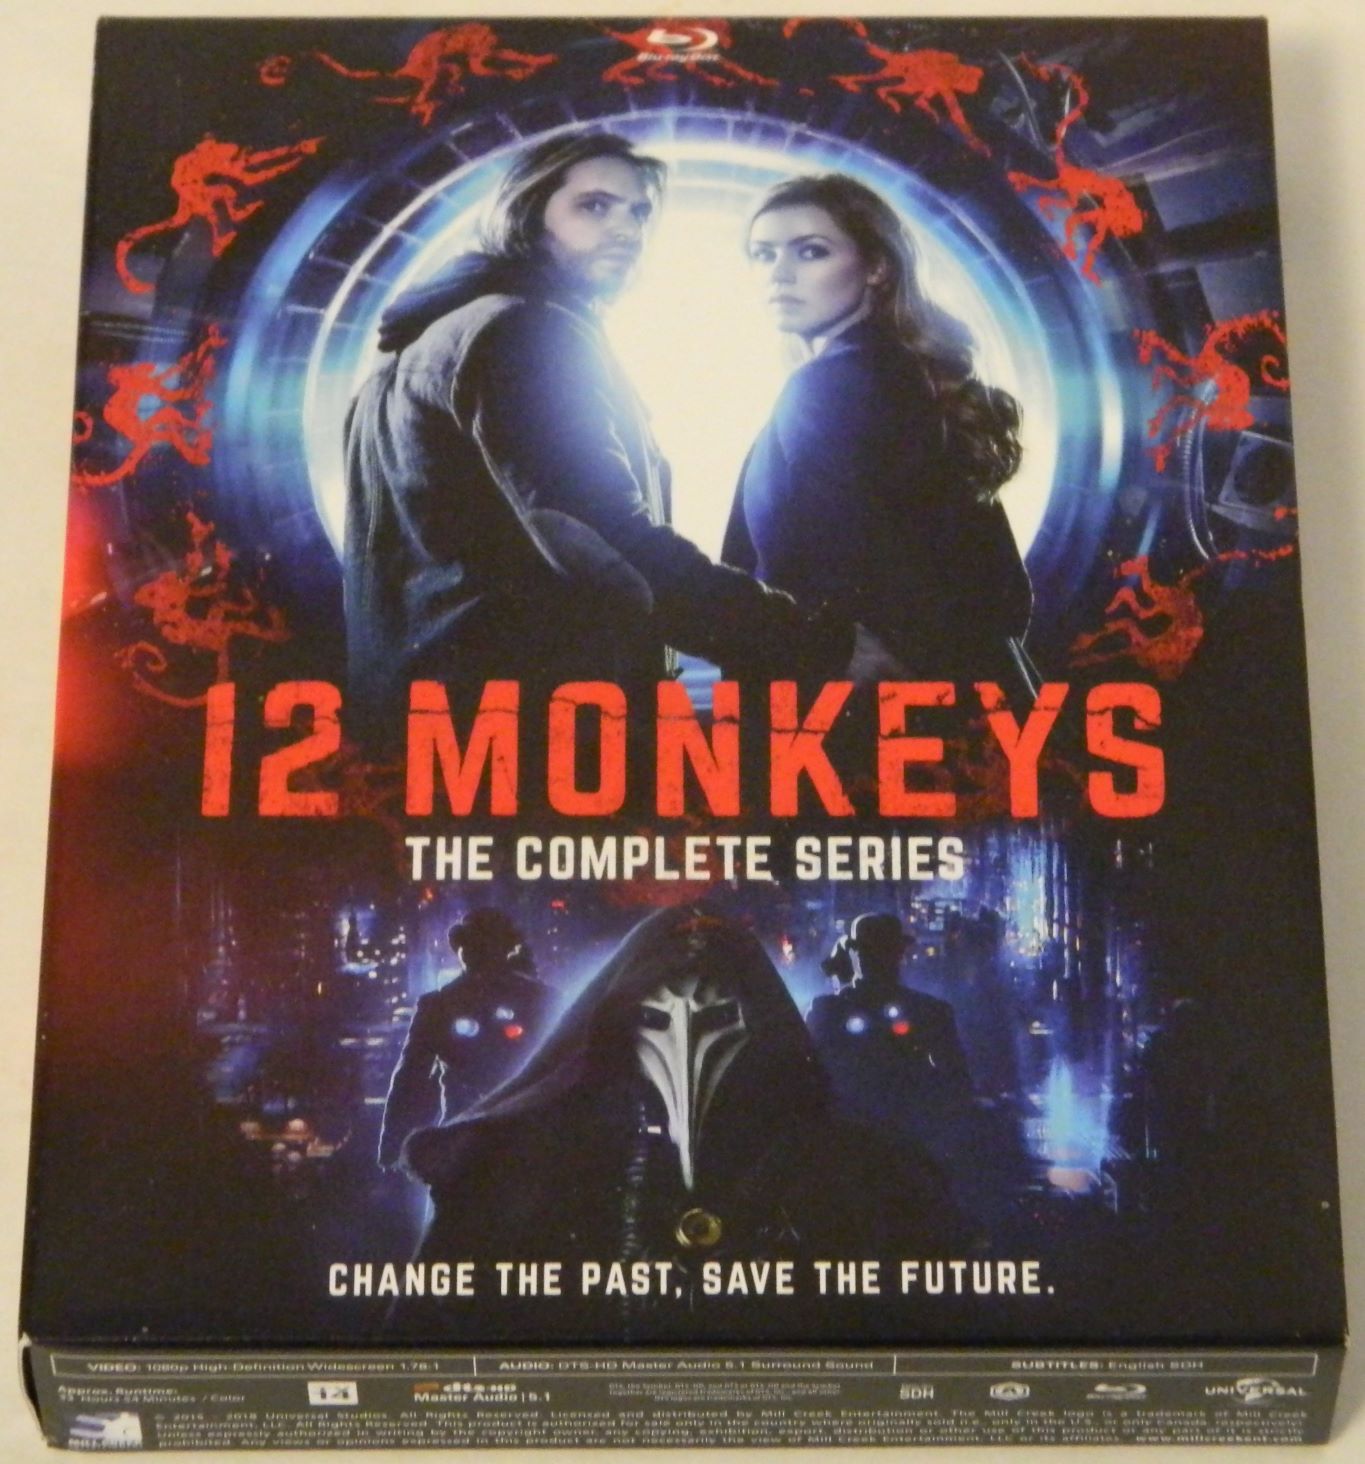 12 Monkeys: The Complete Series Blu-ray Review